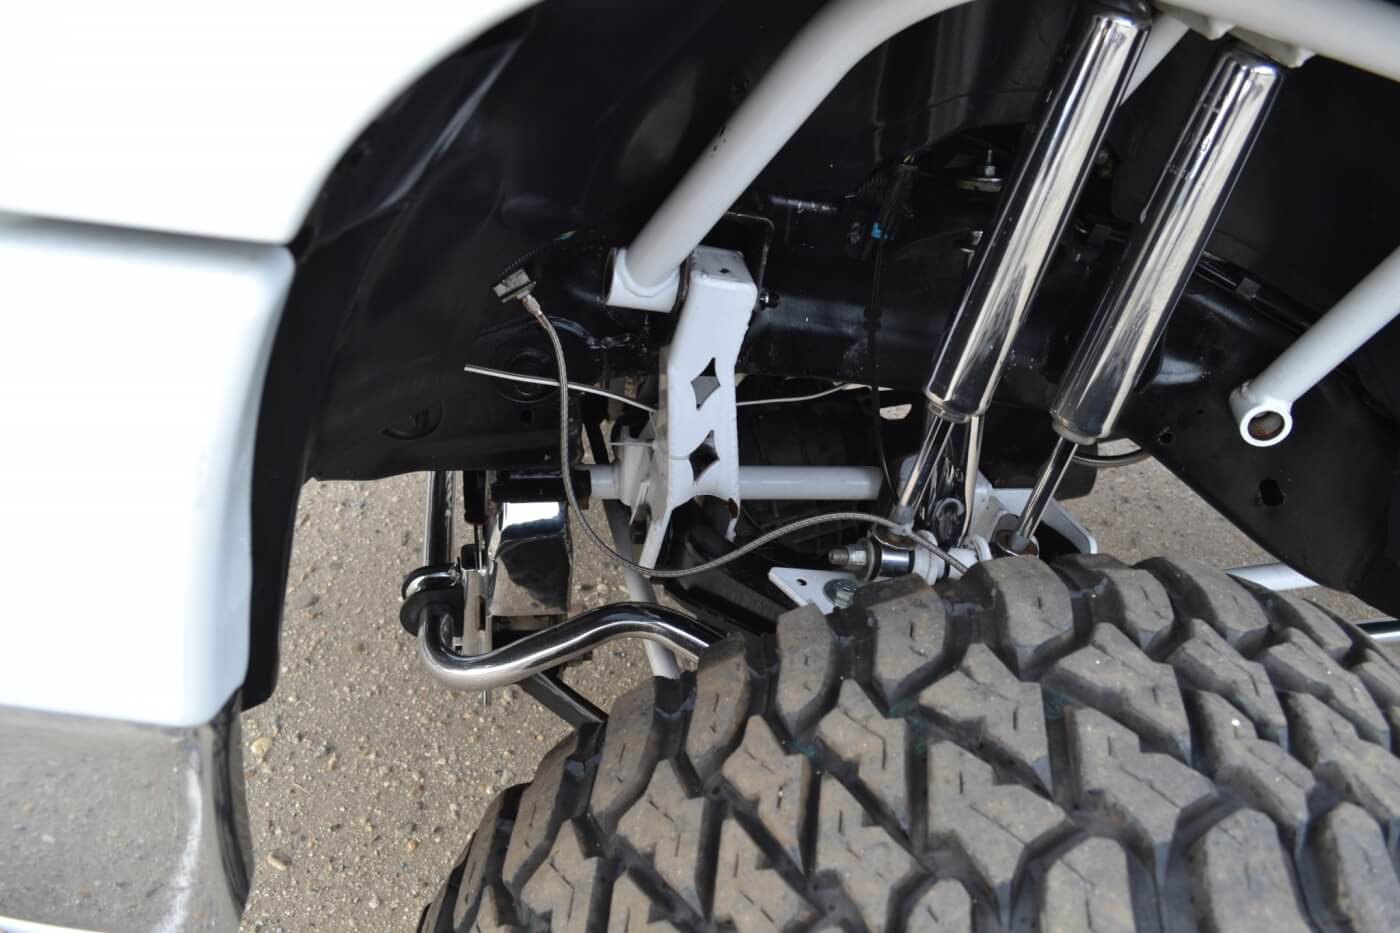 A Full Throttle Suspension (FTS) lift kit raises the front end enough to clear the largest and widest of tires. Although the lift is originally designed for 10 inches, John runs it at 6 inches for better geometry. With minimal breakage over a 10-year period, he must be doing something right.